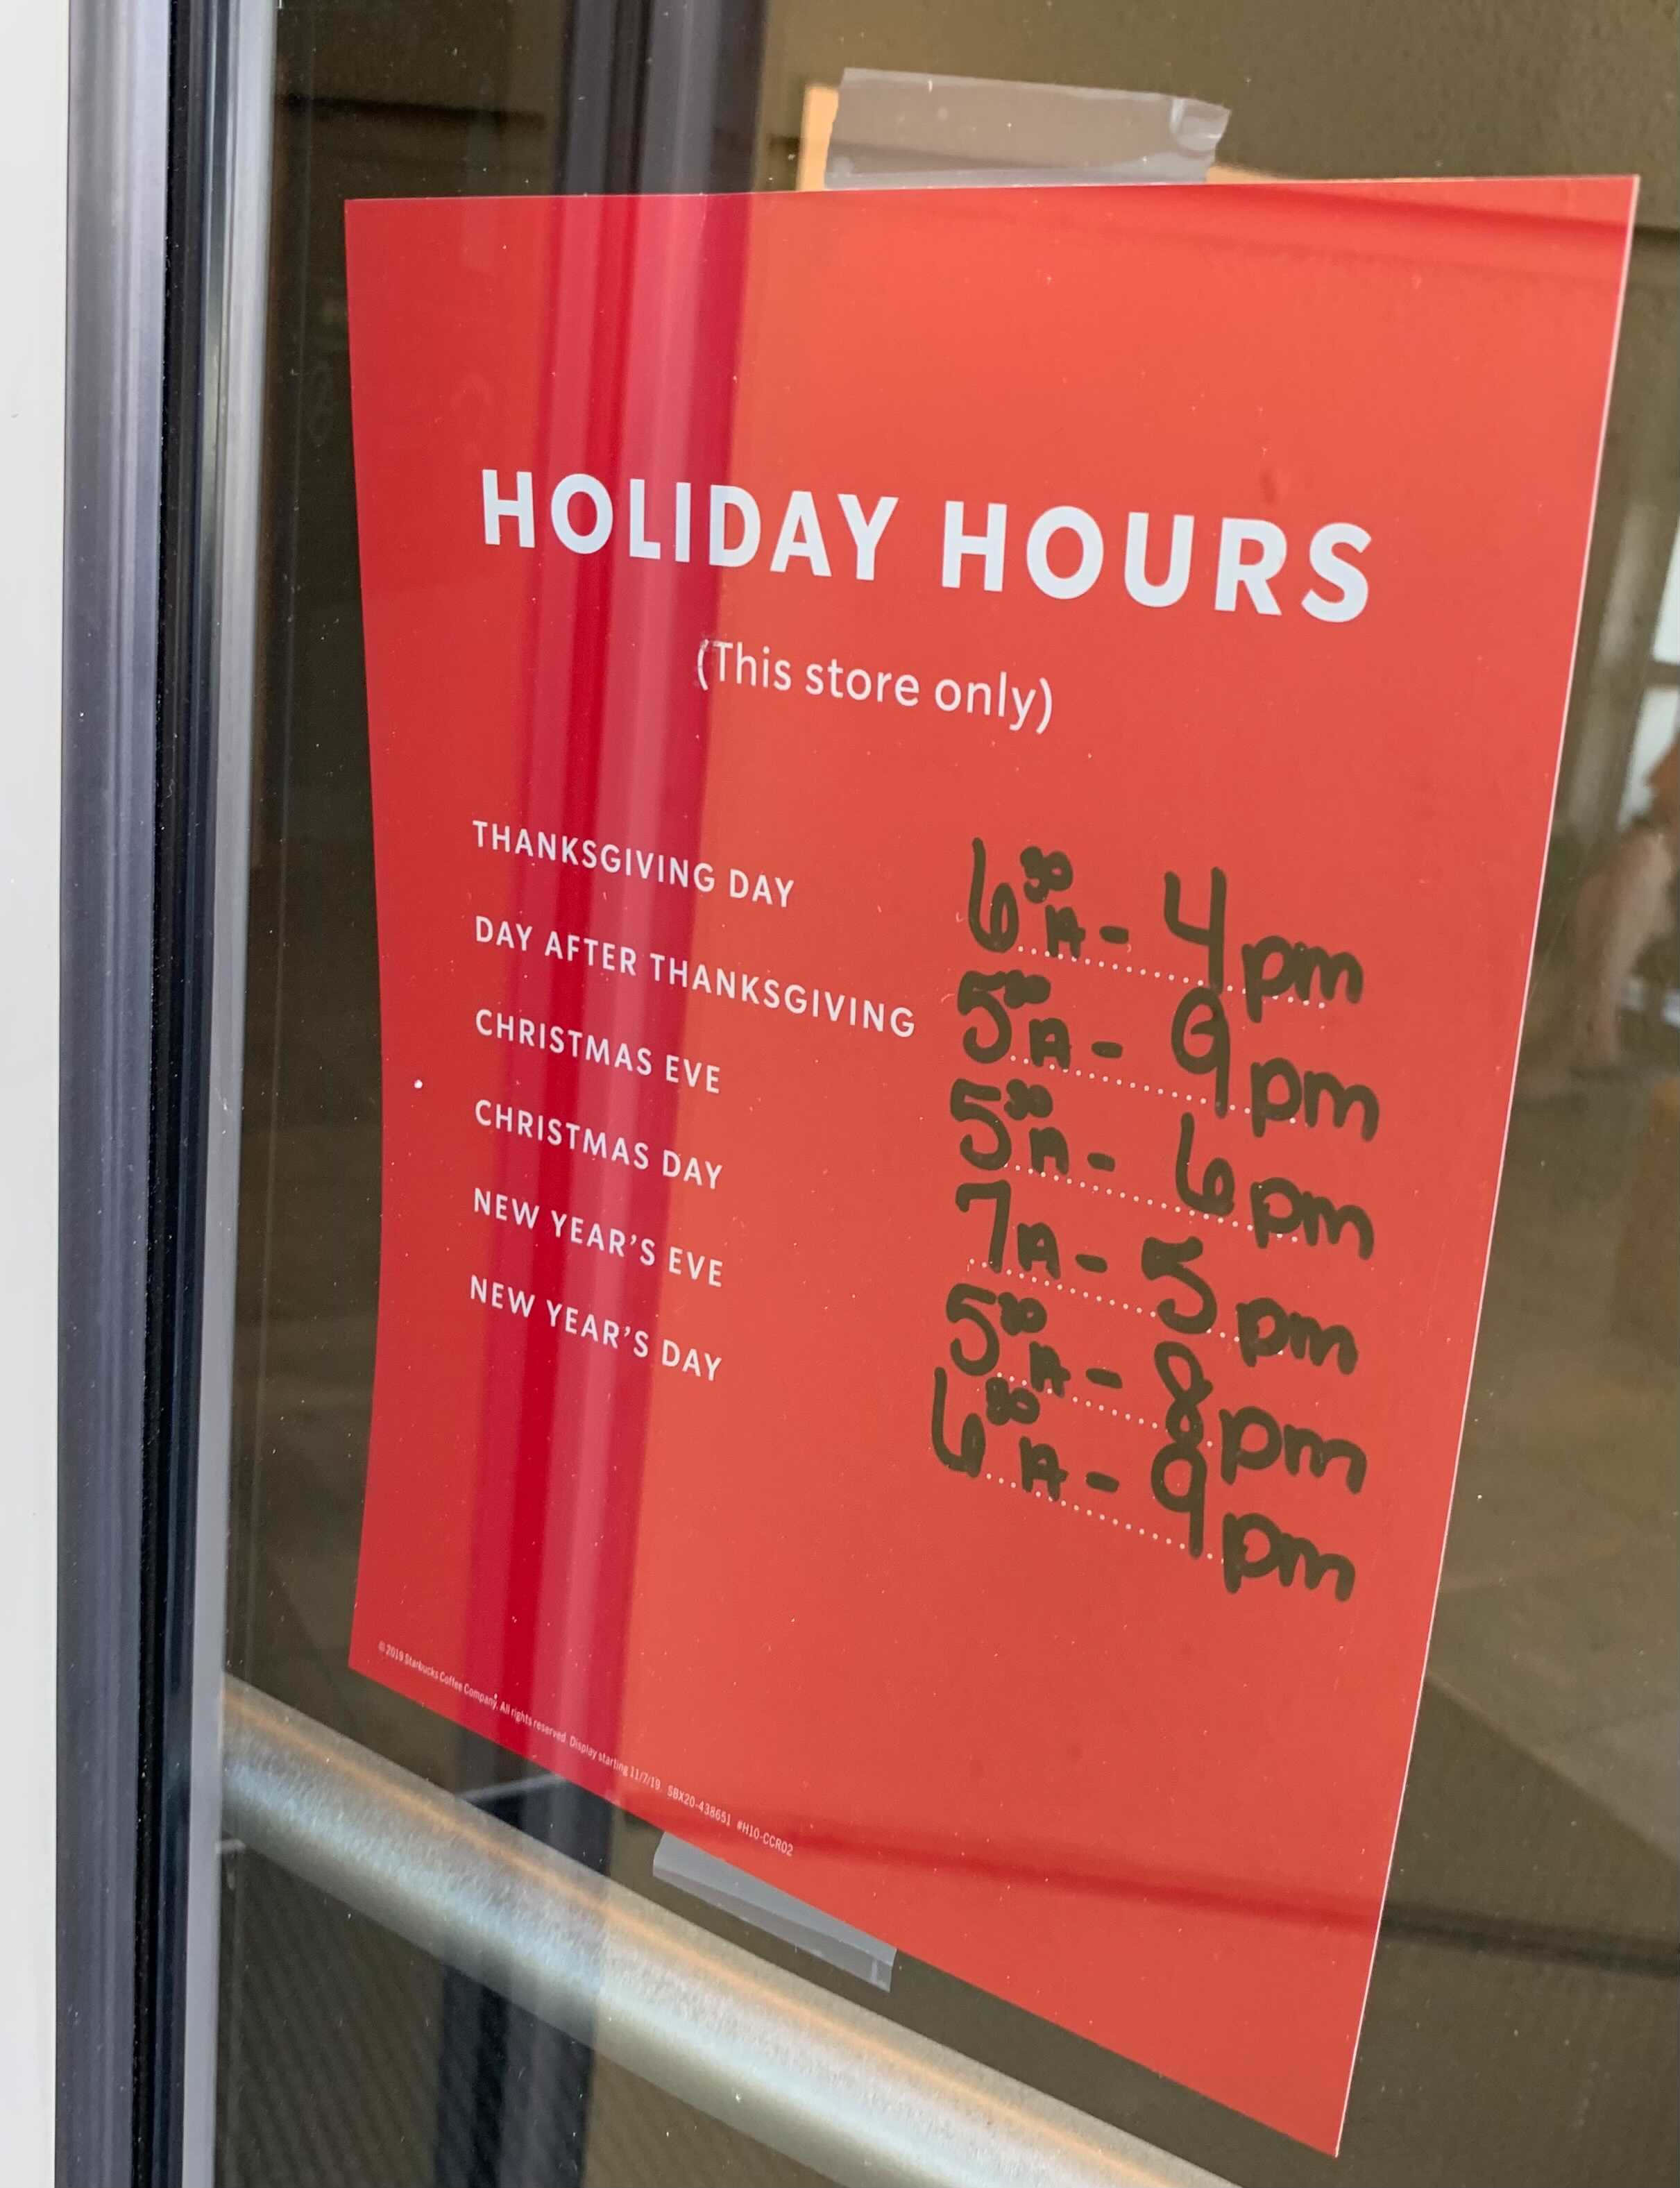 Starbucks What are their Christmas Eve hours 2021?